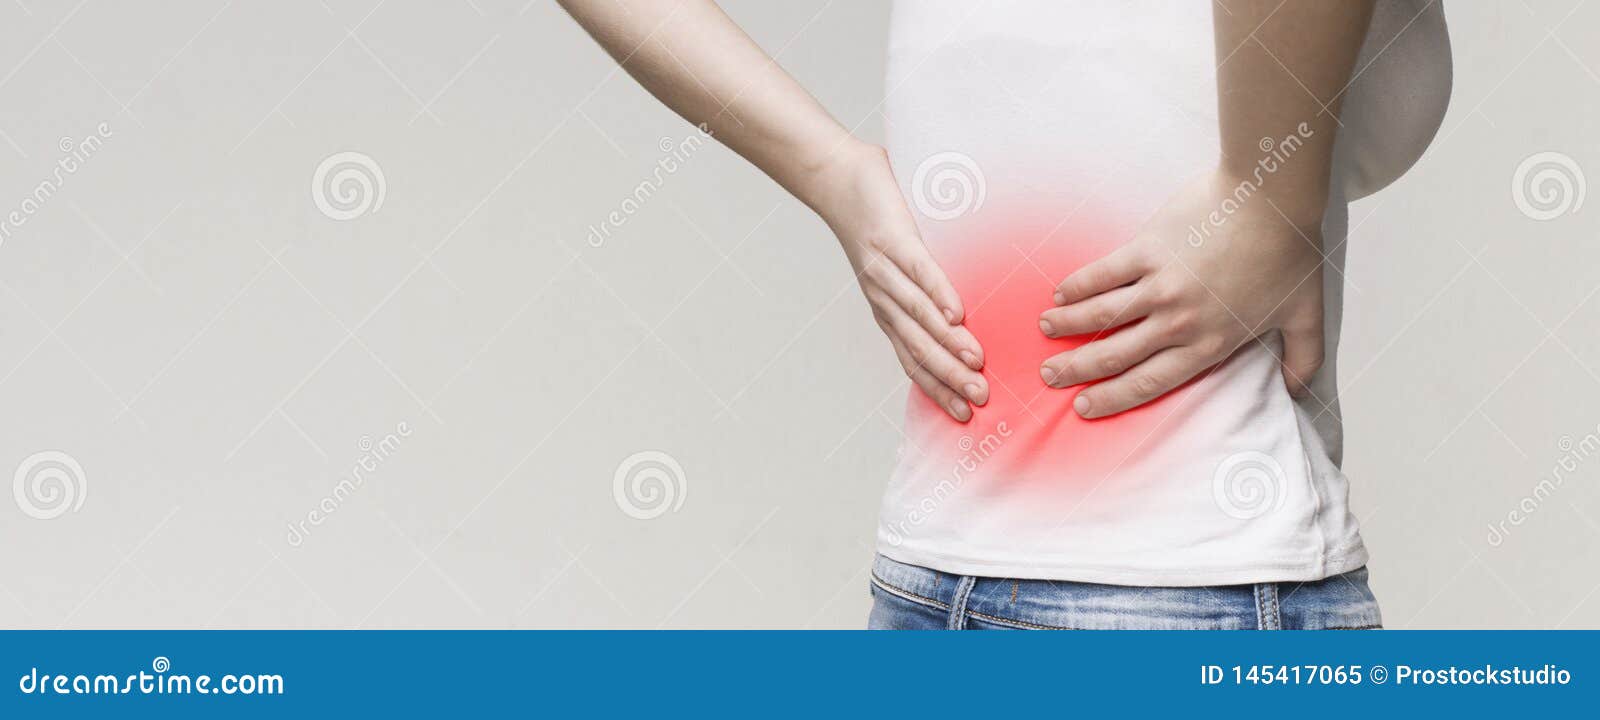 Kidney Inflammation Woman Suffering From Acute Backache Stock Image